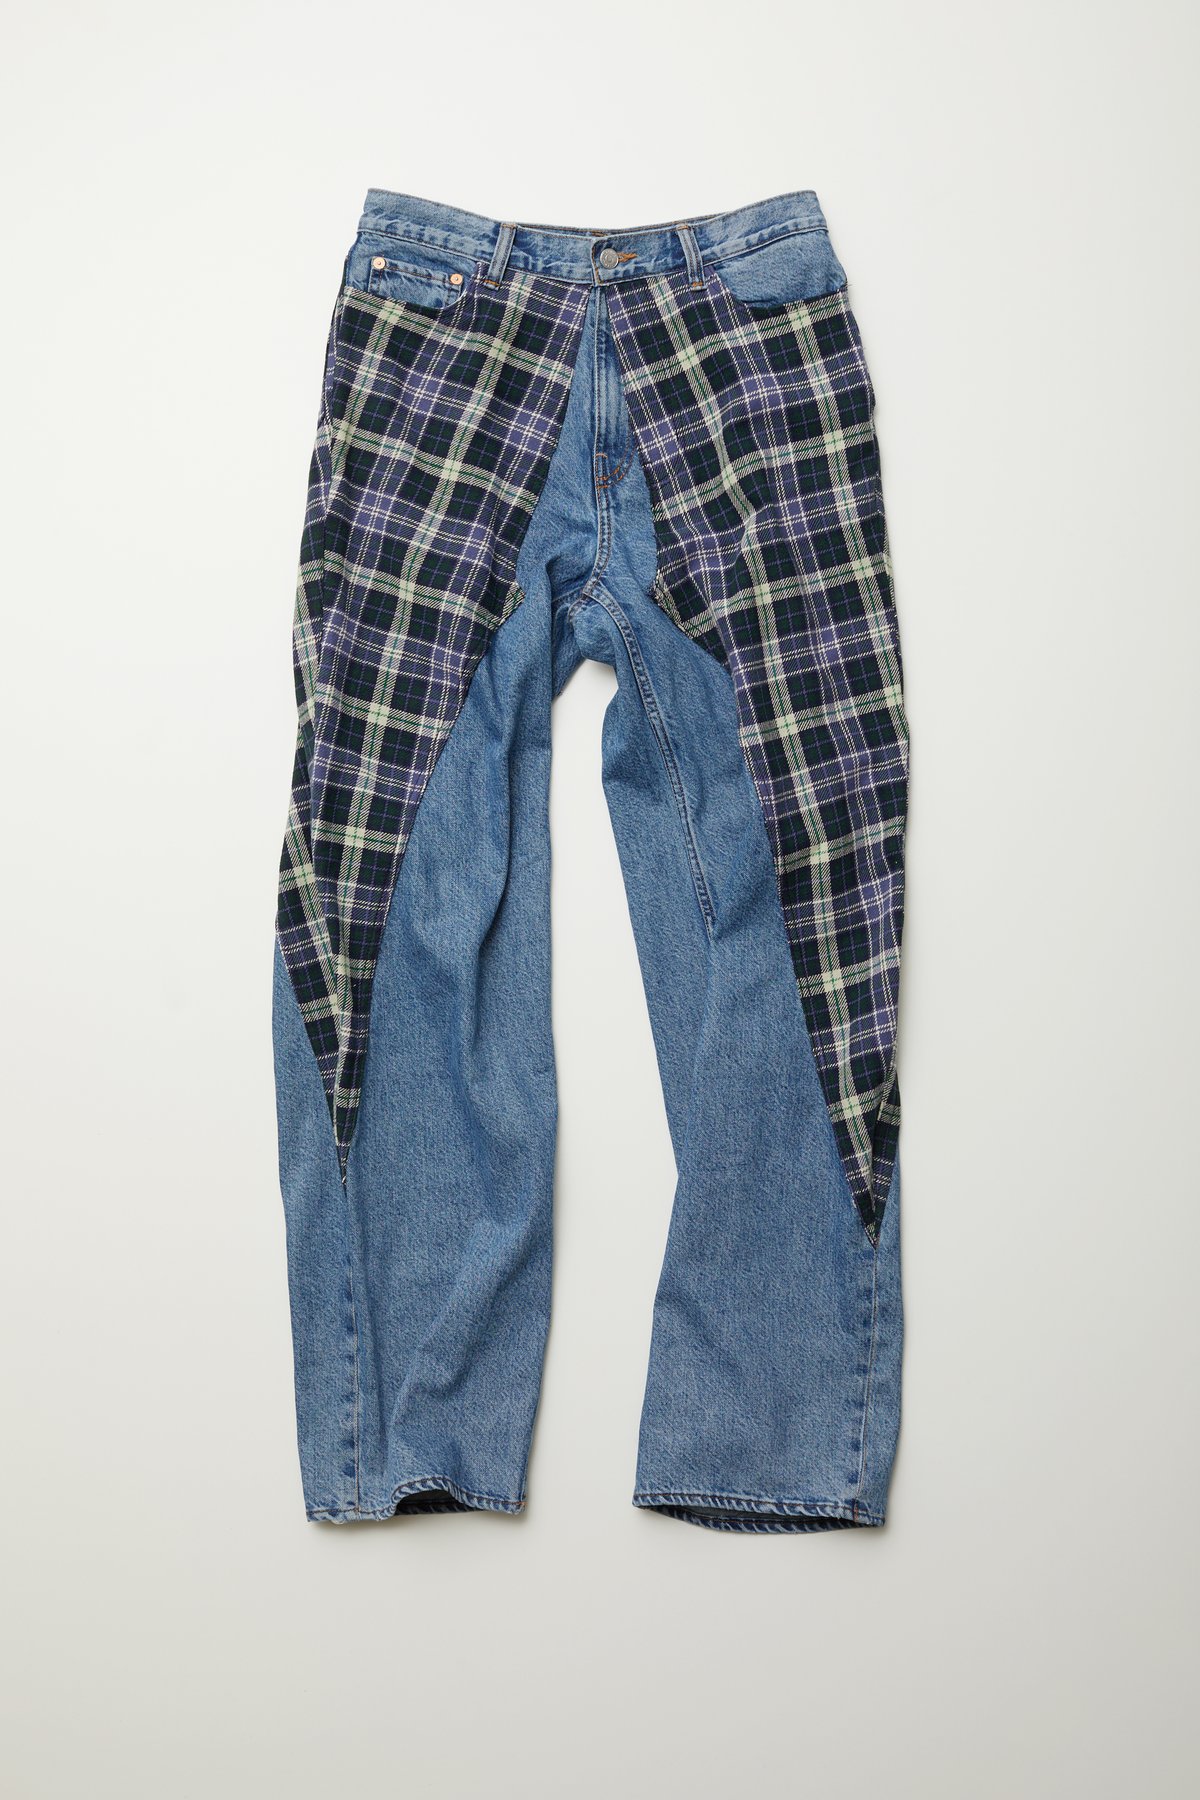 PLAID FLY FRONT JEANS